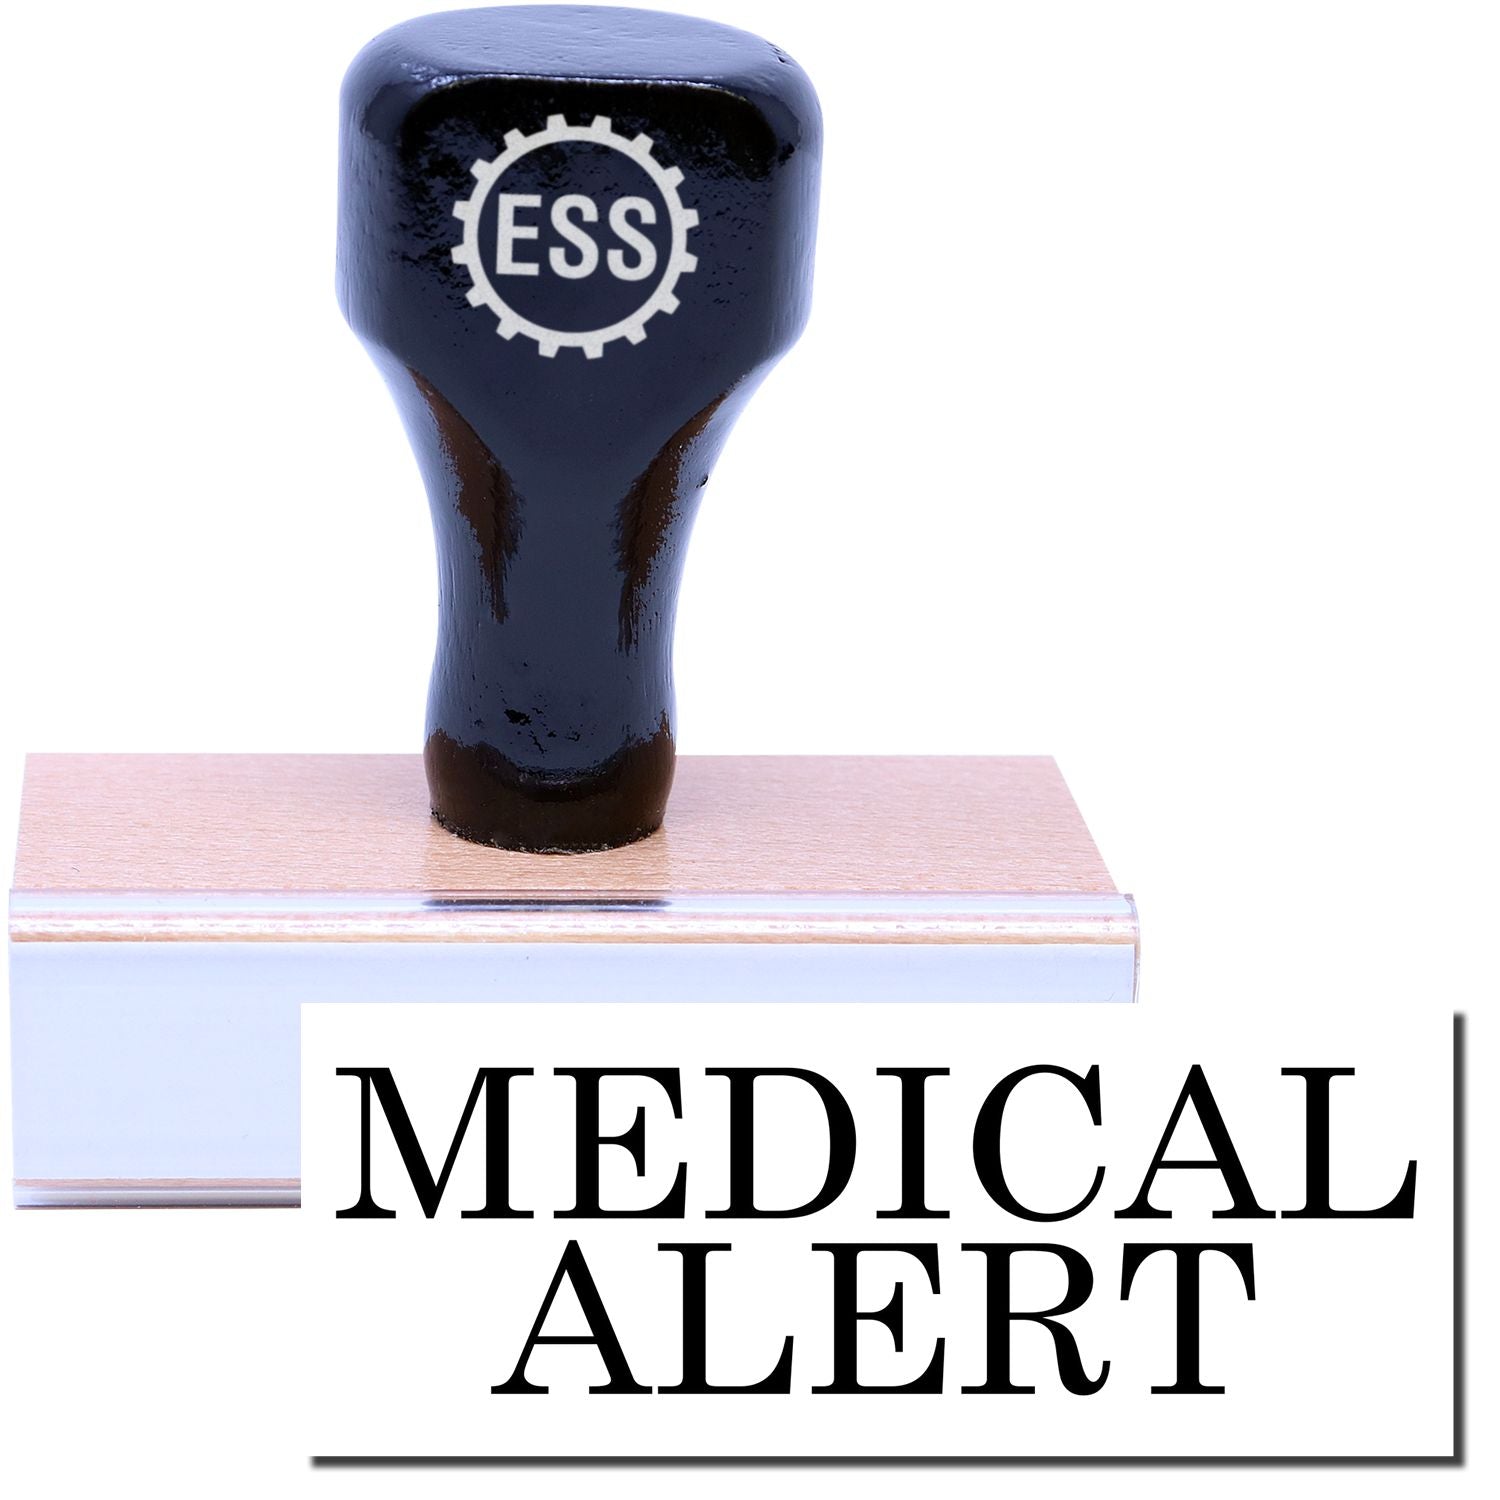 A stock office rubber stamp with a stamped image showing how the text "MEDICAL ALERT" is displayed after stamping.